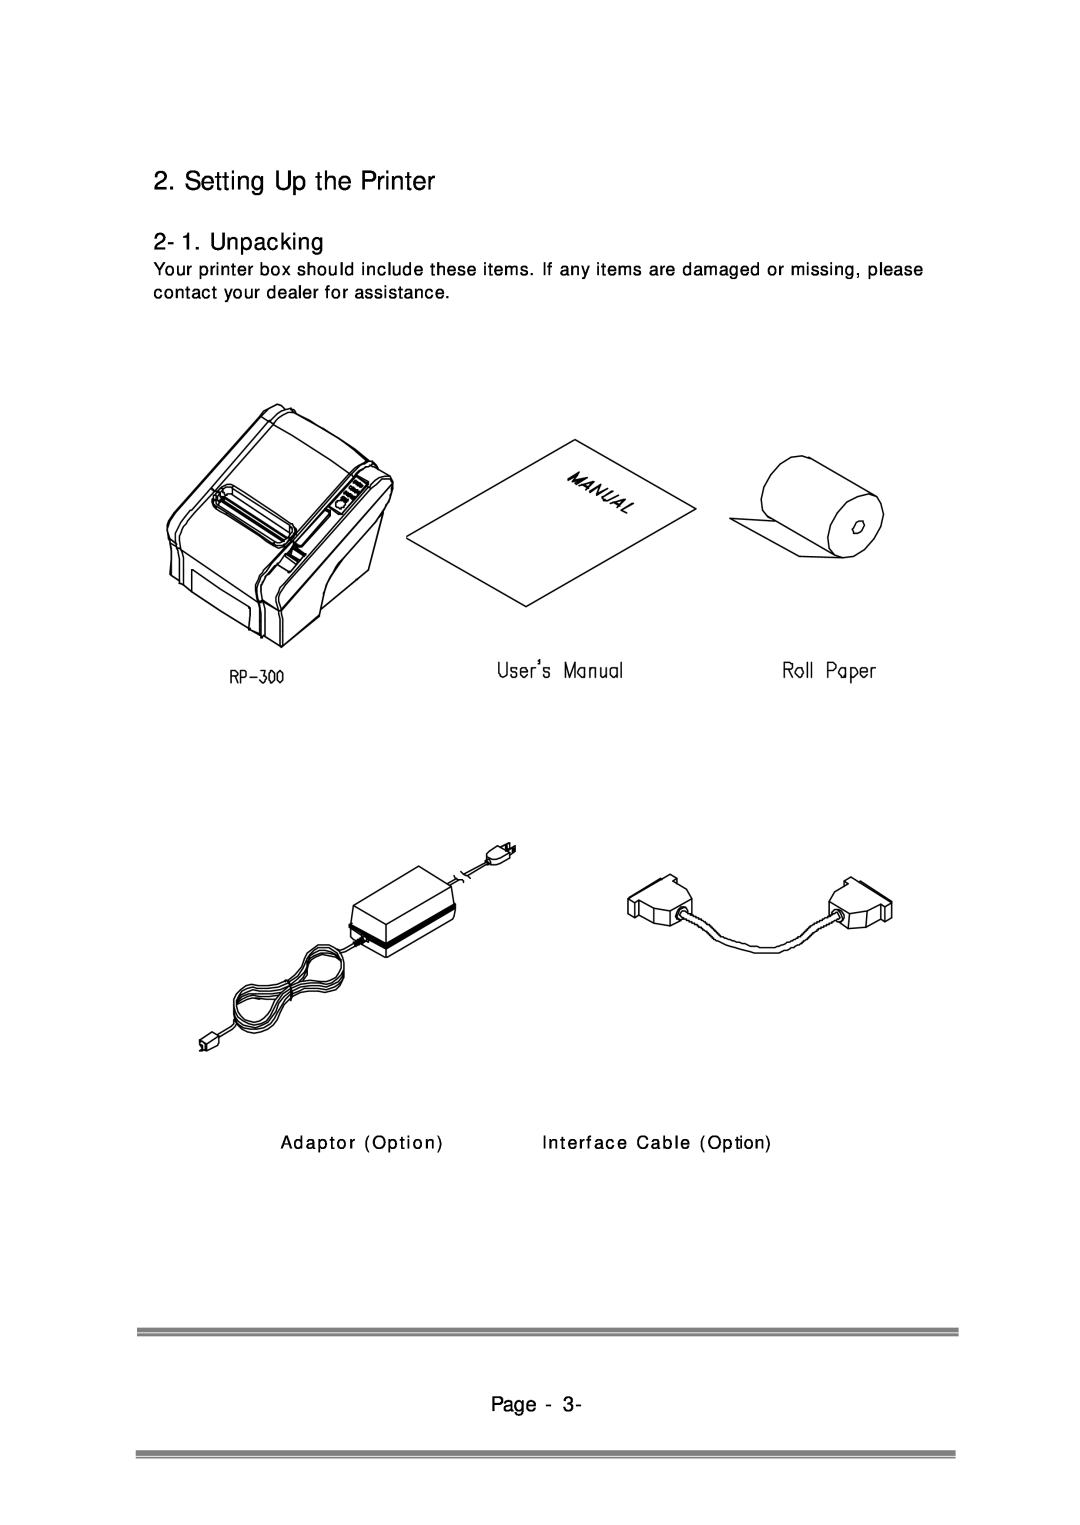 Epson RP-300, RP-310 user manual Setting Up the Printer, Unpacking, Page 